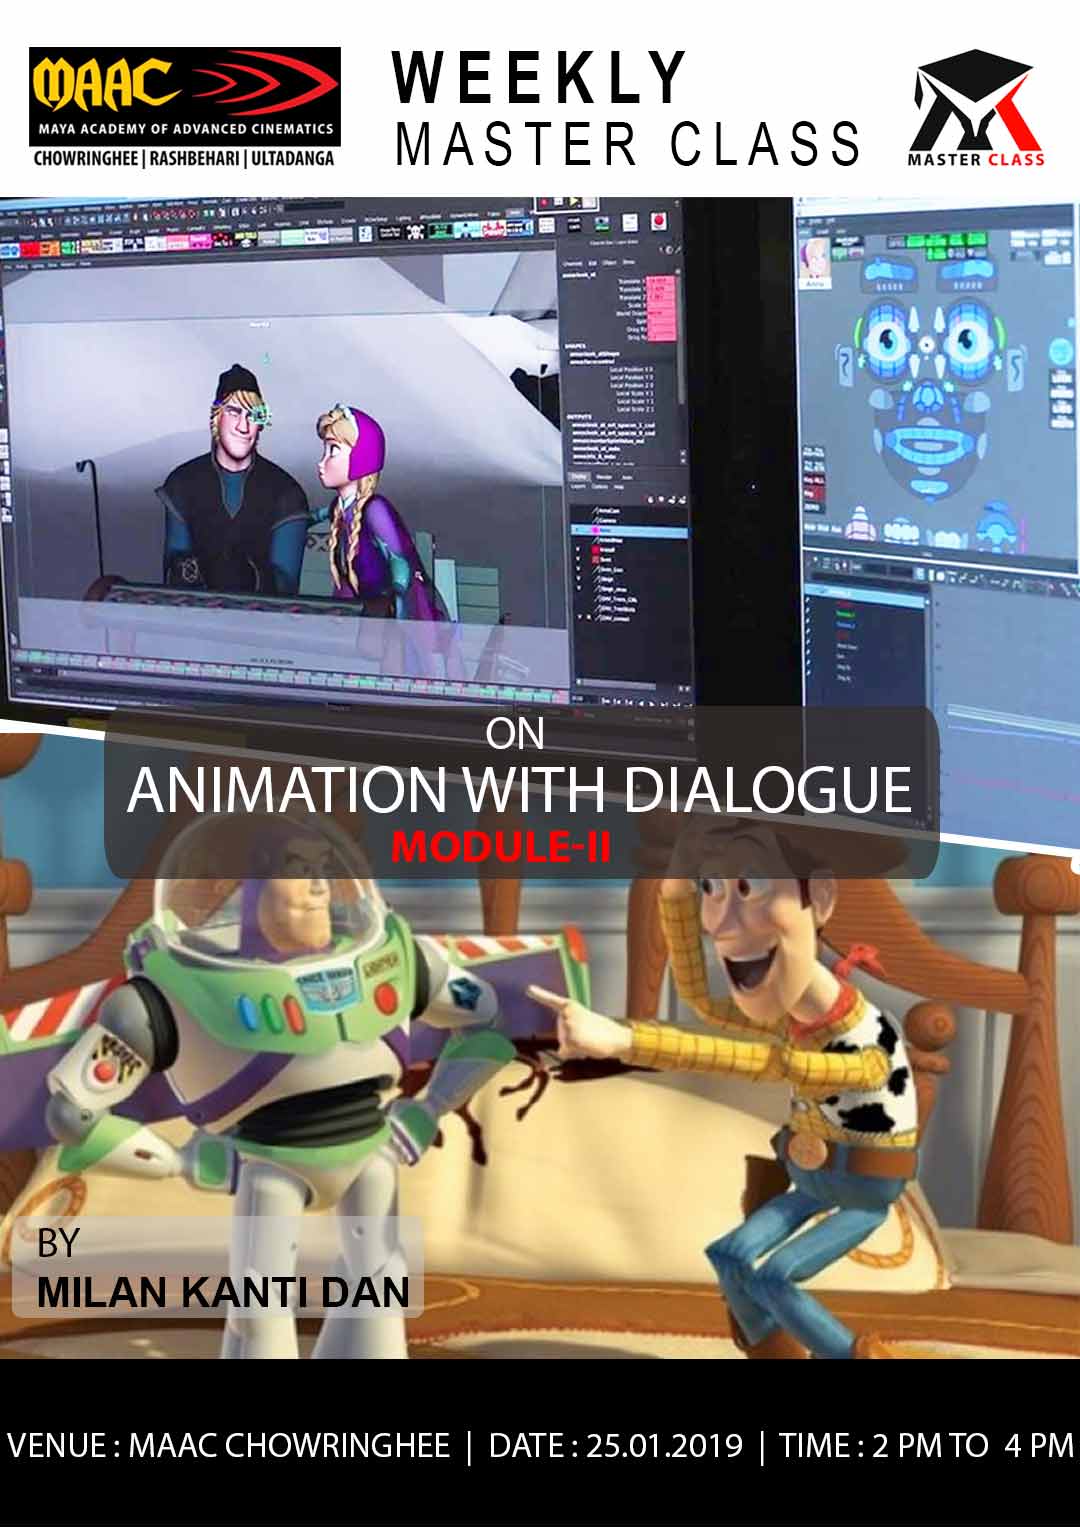 Weekly Master Class on Animation with Dialogue Module 2